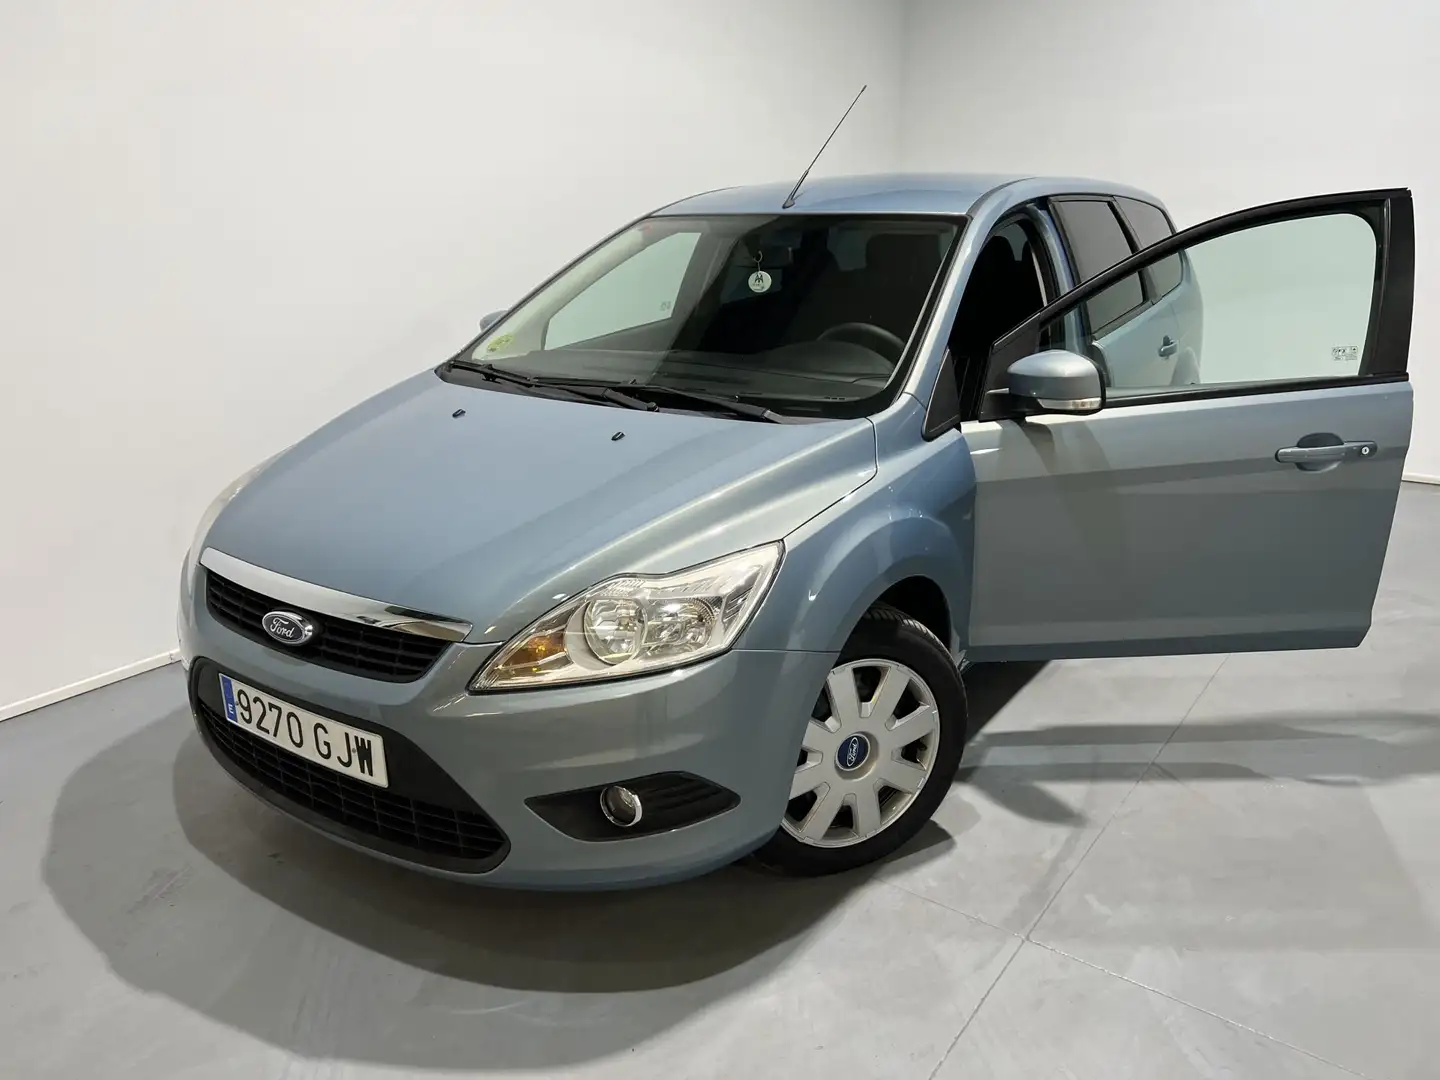 Ford Focus S.Br. 1.8TDCi Trend X-Road Verde - 2